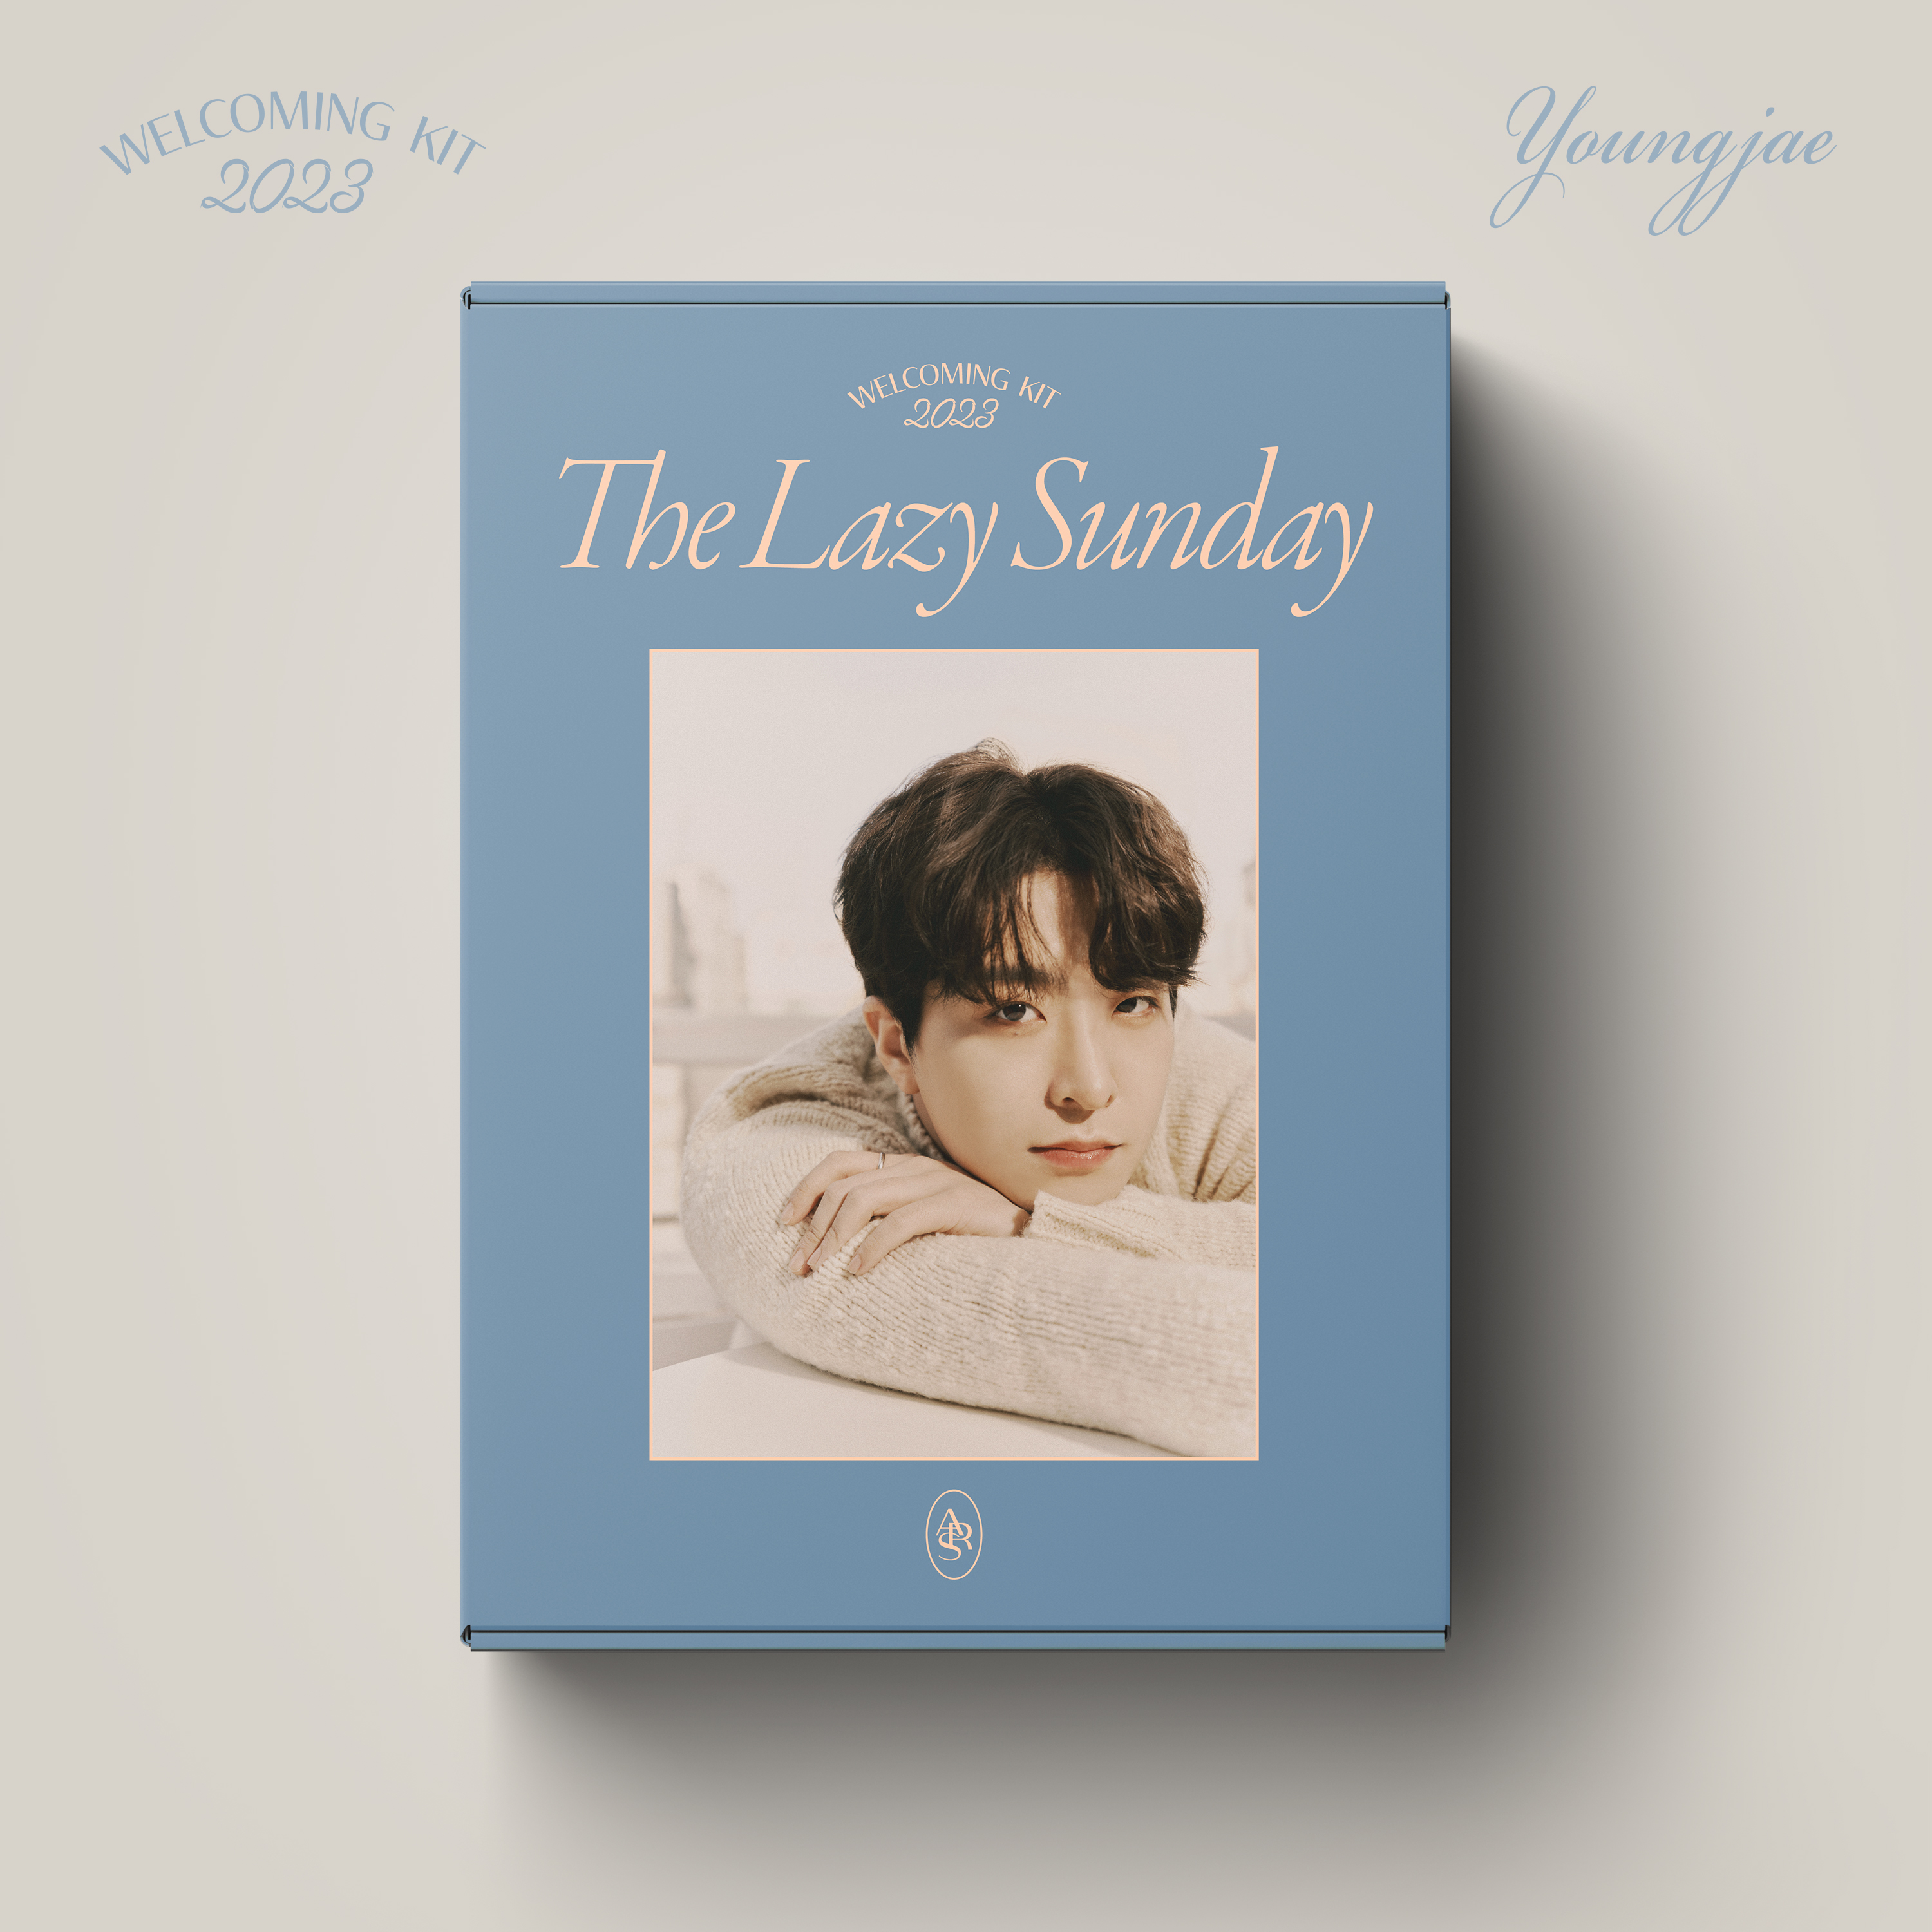 [Off-Line Sign Event] YOUNGJAE - 2023 WELCOMING KIT [The Lazy Sunday]